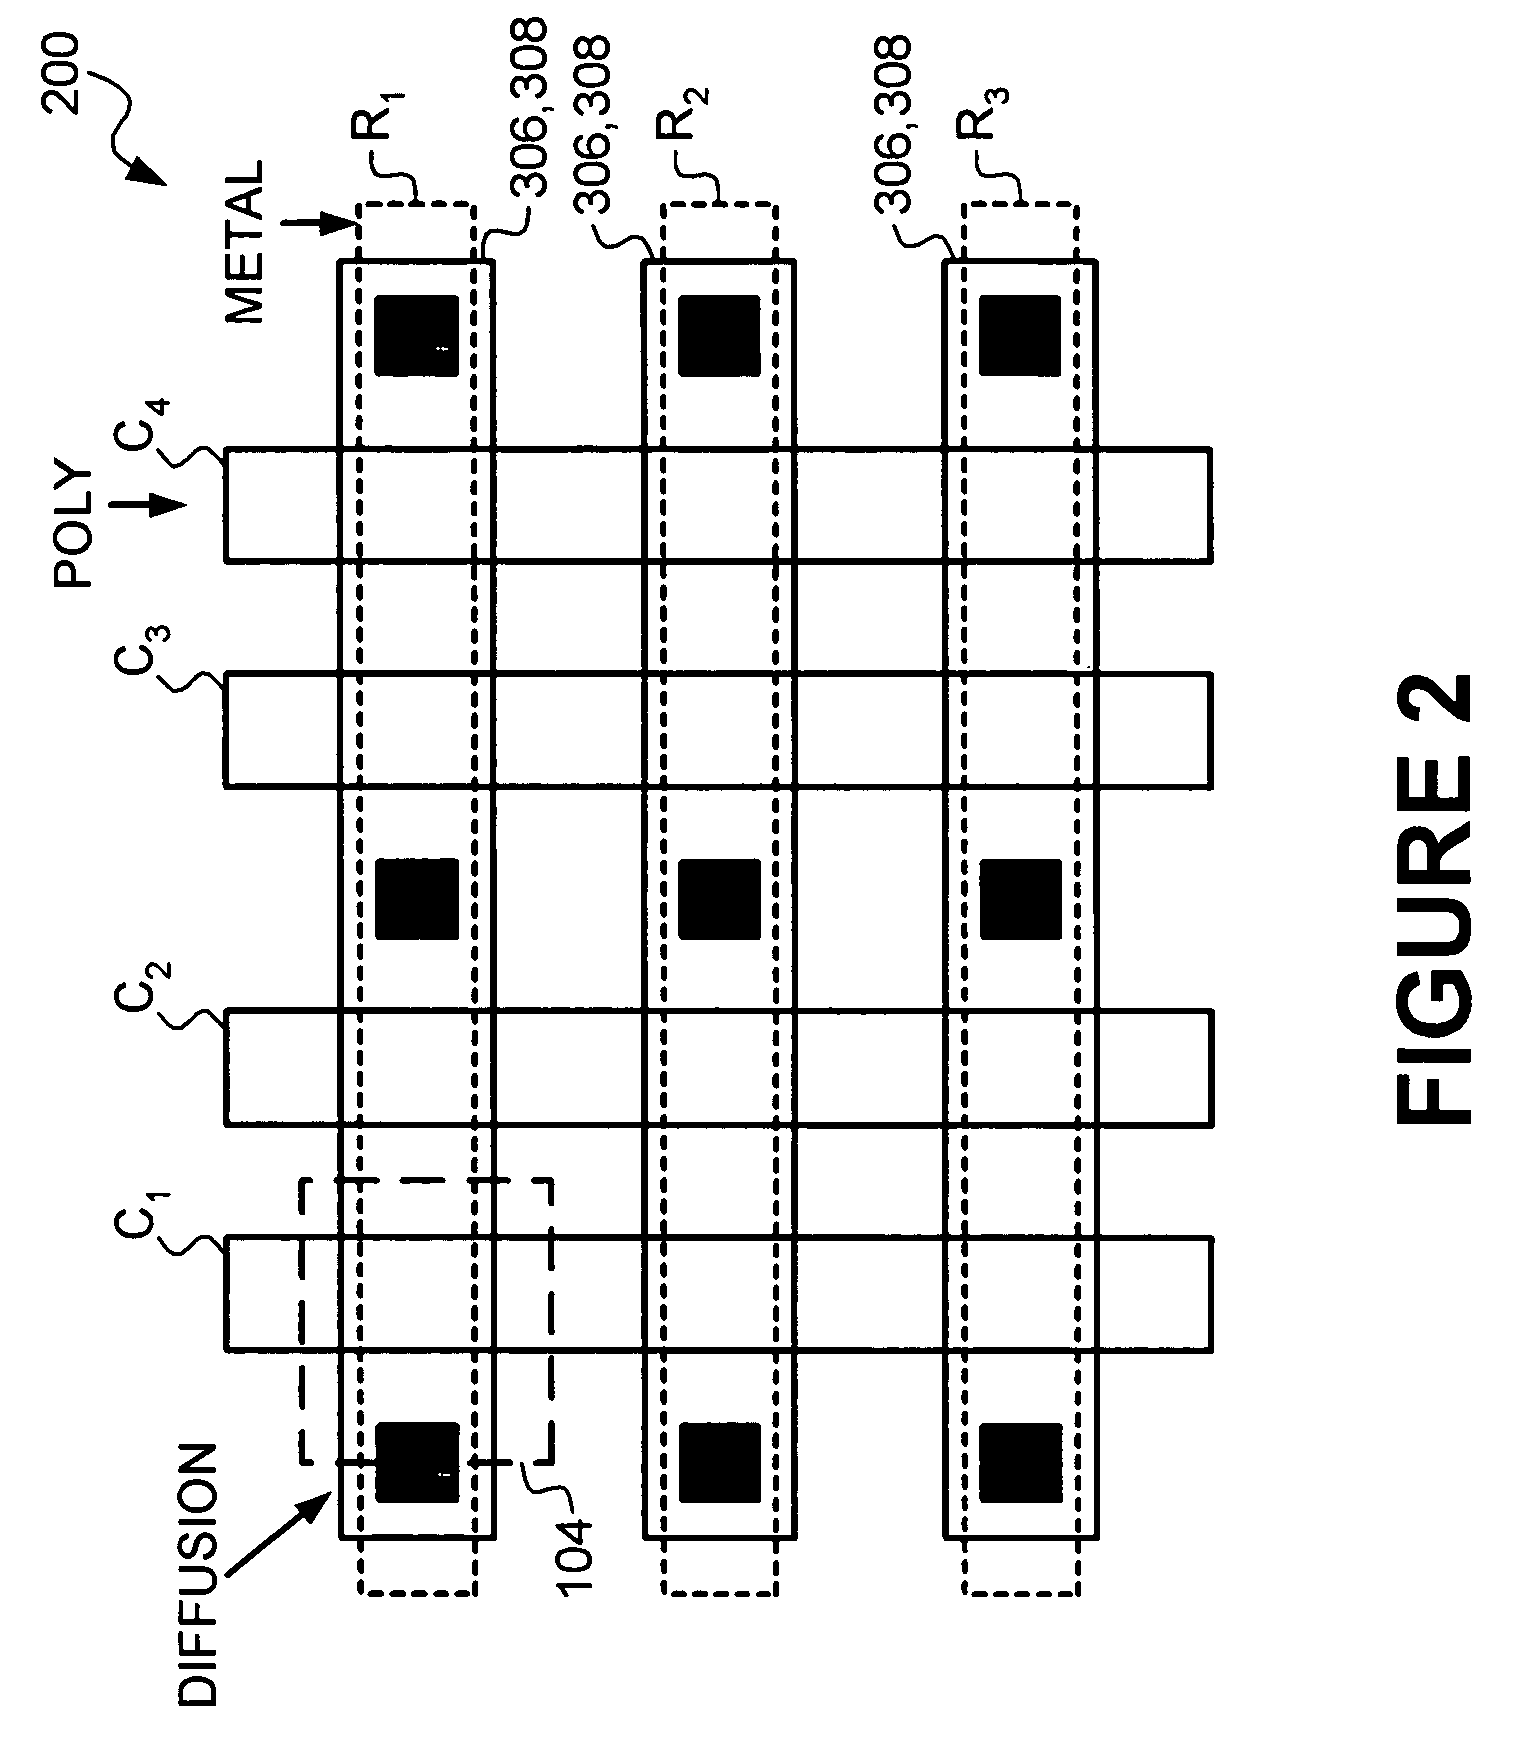 High density semiconductor memory cell and memory array using a single transistor and having counter-doped poly and buried diffusion wordline